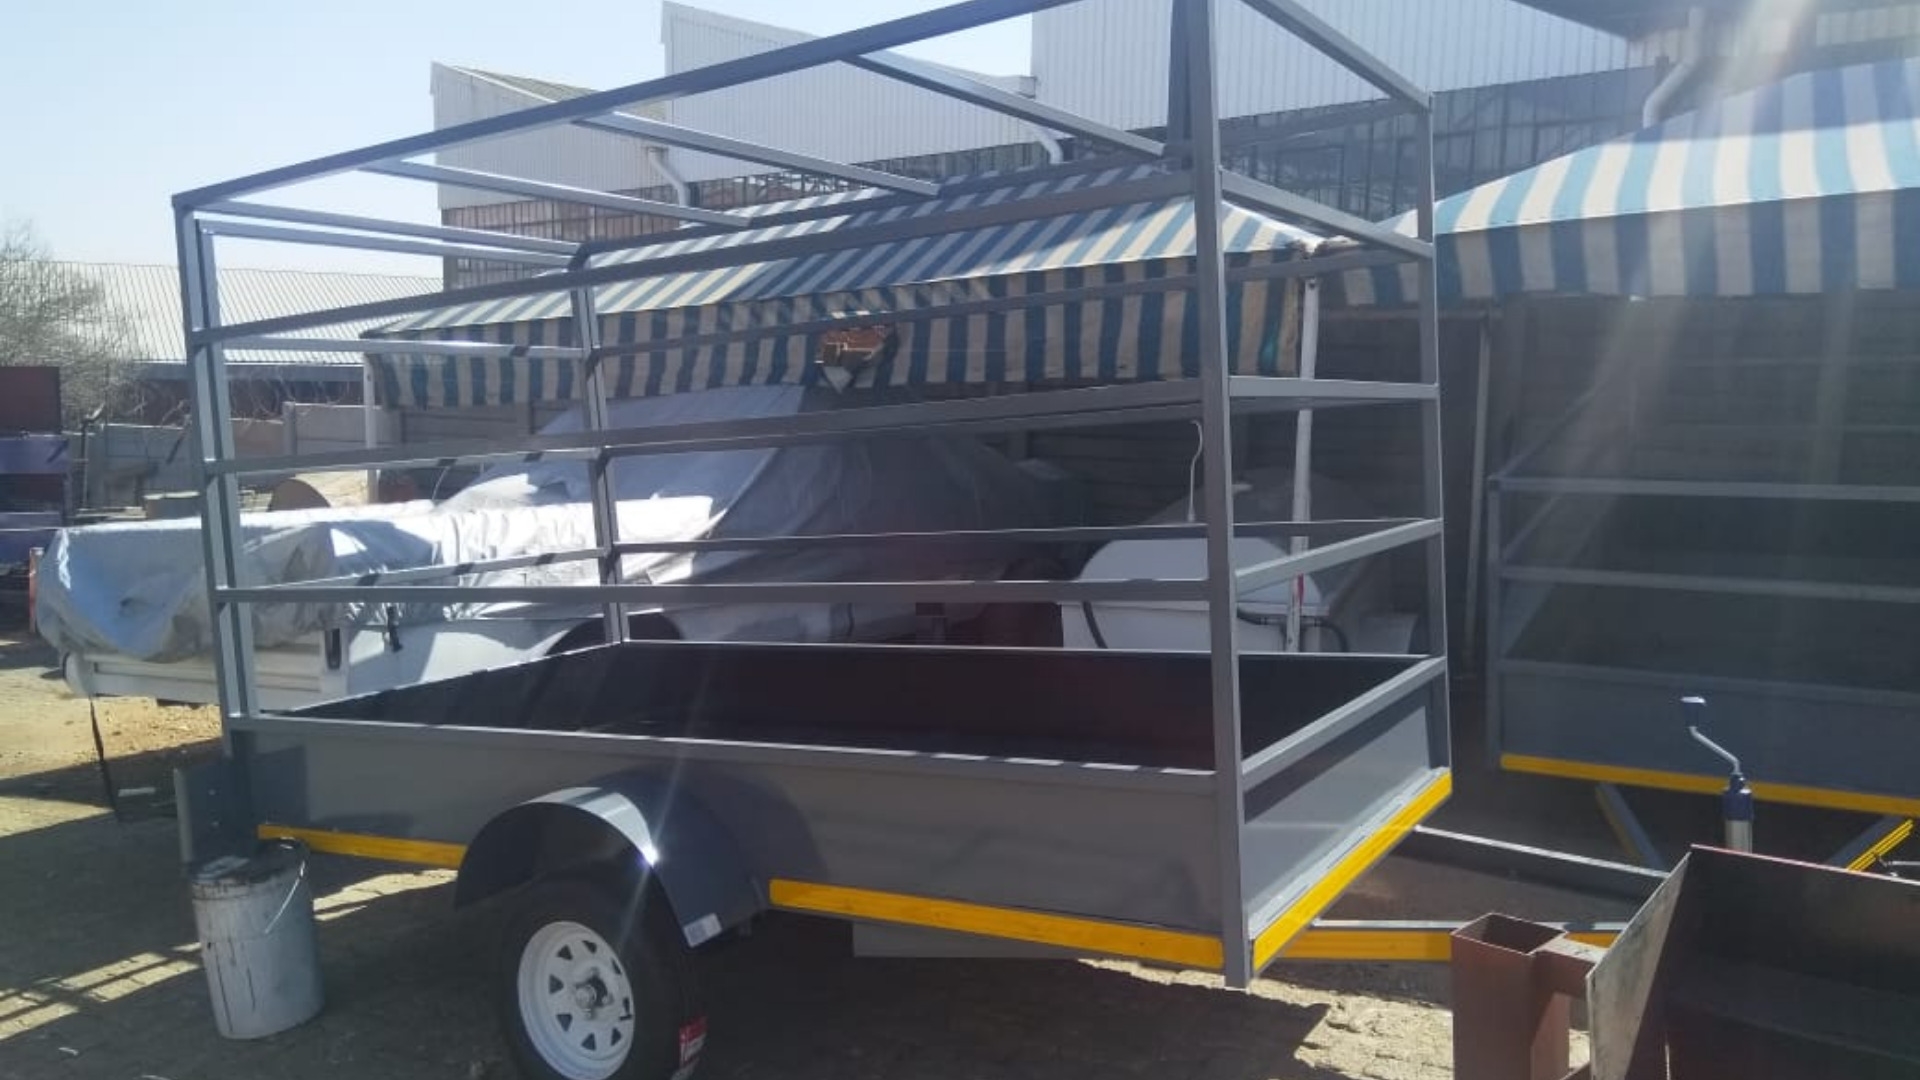 Other Fuel tankers sheep deck trailers 2020 for sale by Fuel Trailers and Tankers Durban | Truck & Trailer Marketplaces